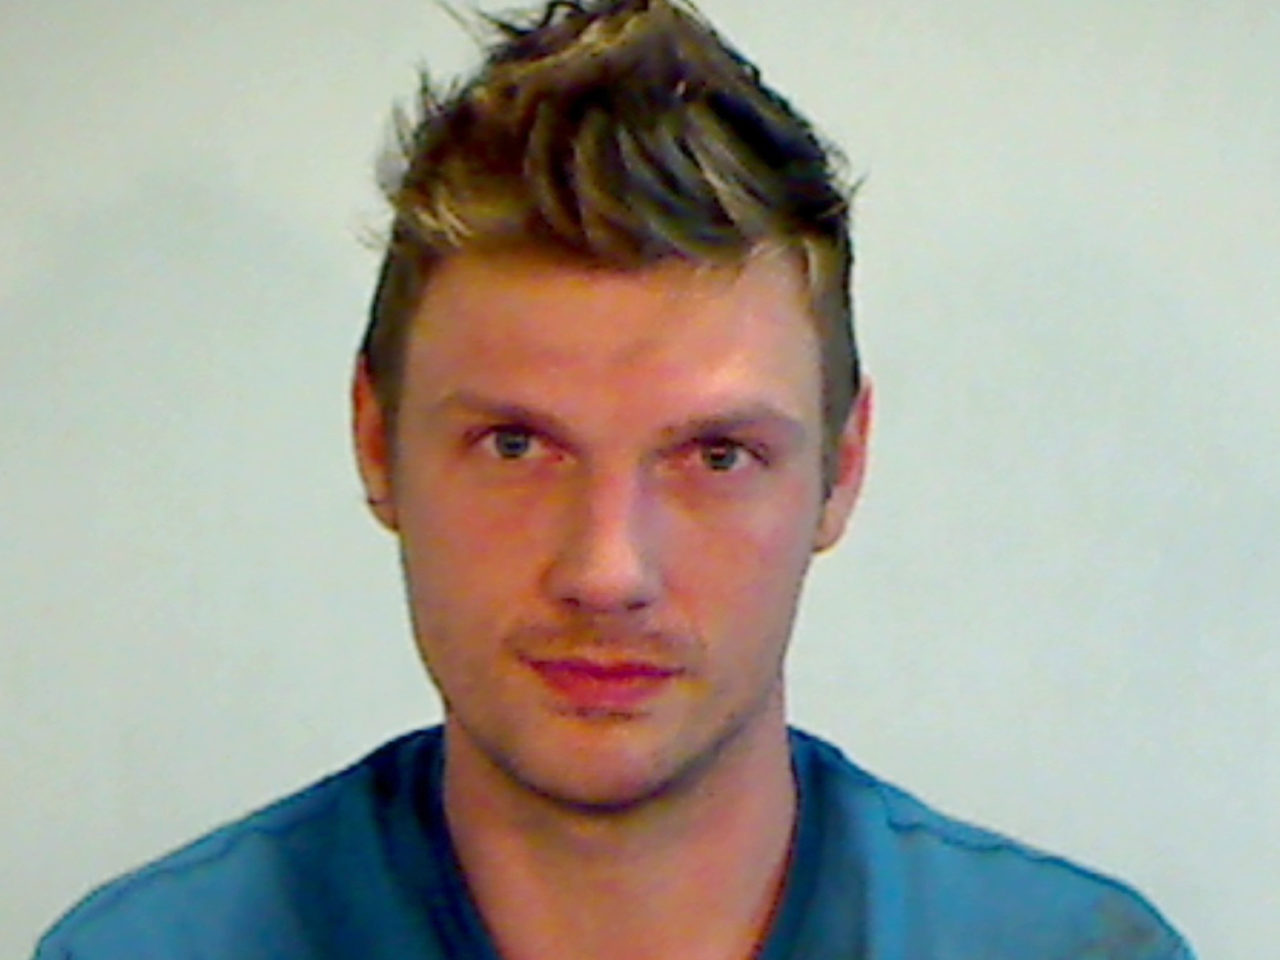 KEY WEST, FL - JANUARY 13: (EDITORS NOTE: Best quality available) In this handout photo provided by the Key West Police Department, singer Nick Carter of the Backstreet Boys is seen in a police booking photo after his arrest for misdemeanor battery January 13, 2015 in Key West, Florida. The arrest followed and incident at Hogs Breath Saloon in Key West after Carter and another man he was with were allegedly in an altercation with employees of the bar.